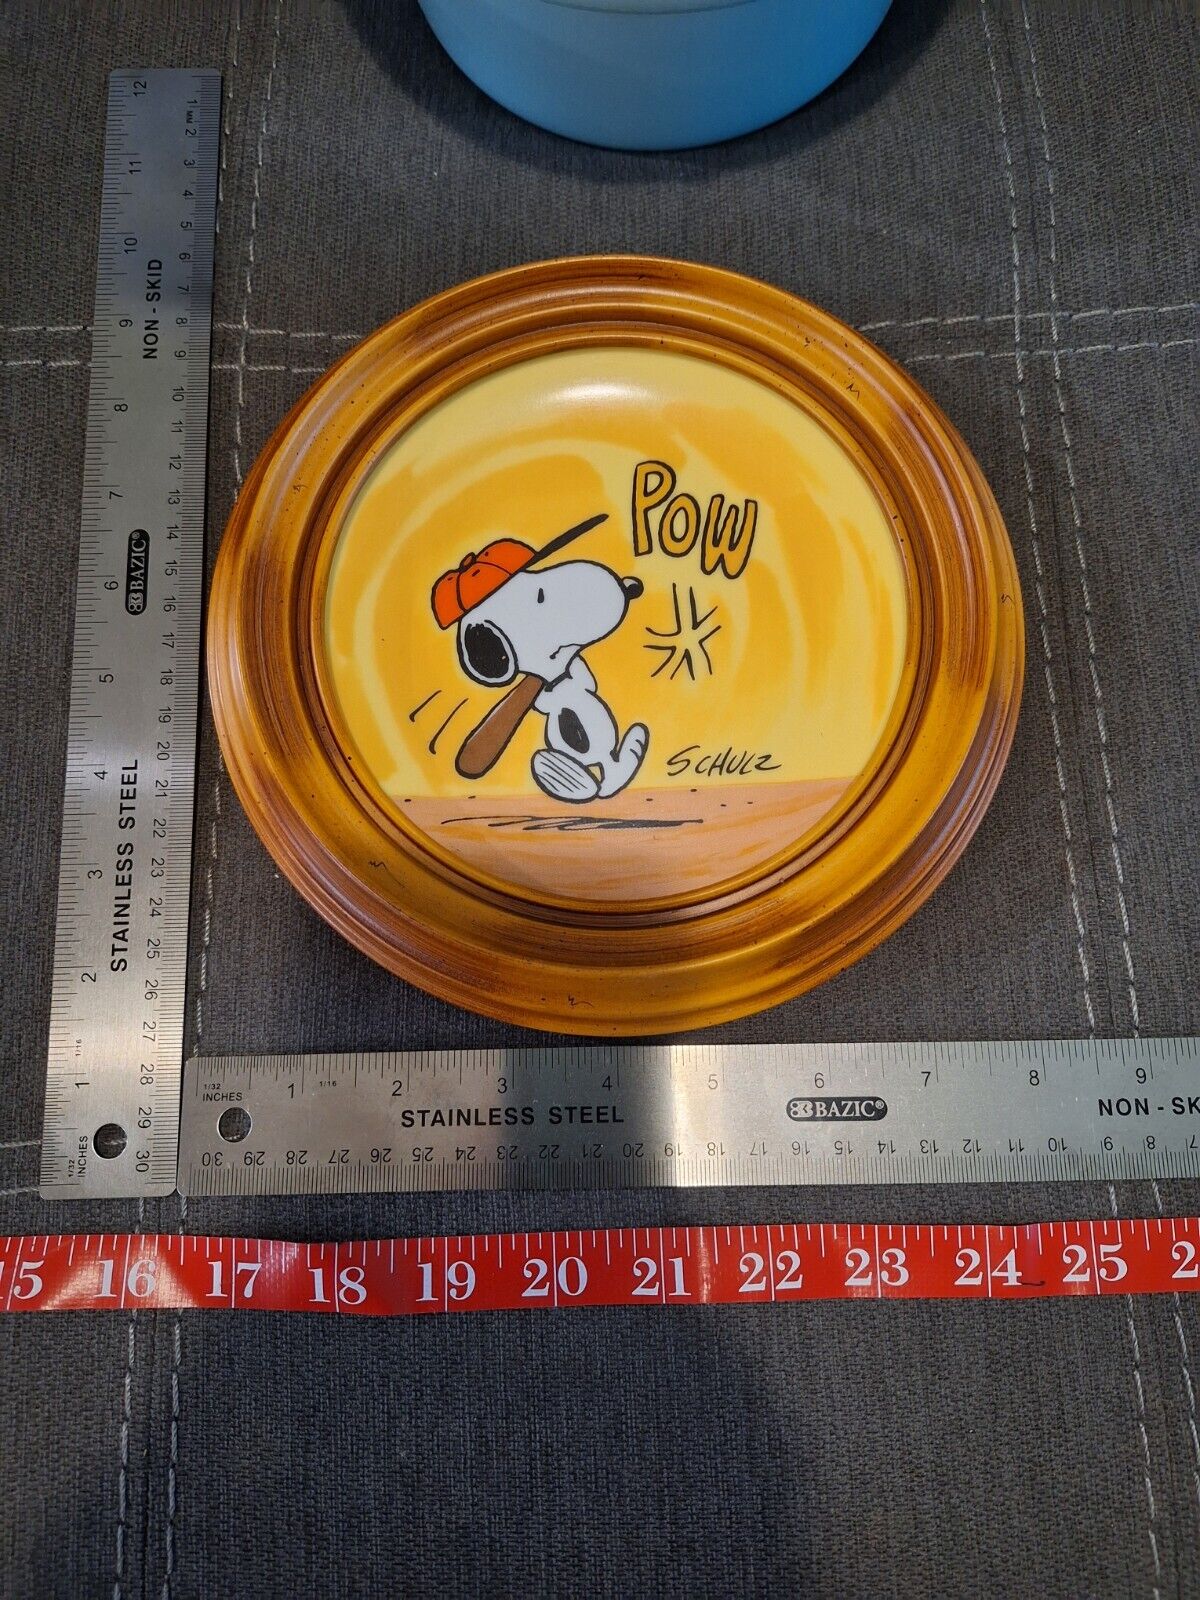 SNOOPY BASEBALL PLAYER PLATE IN ROUND HANGING FRAME.